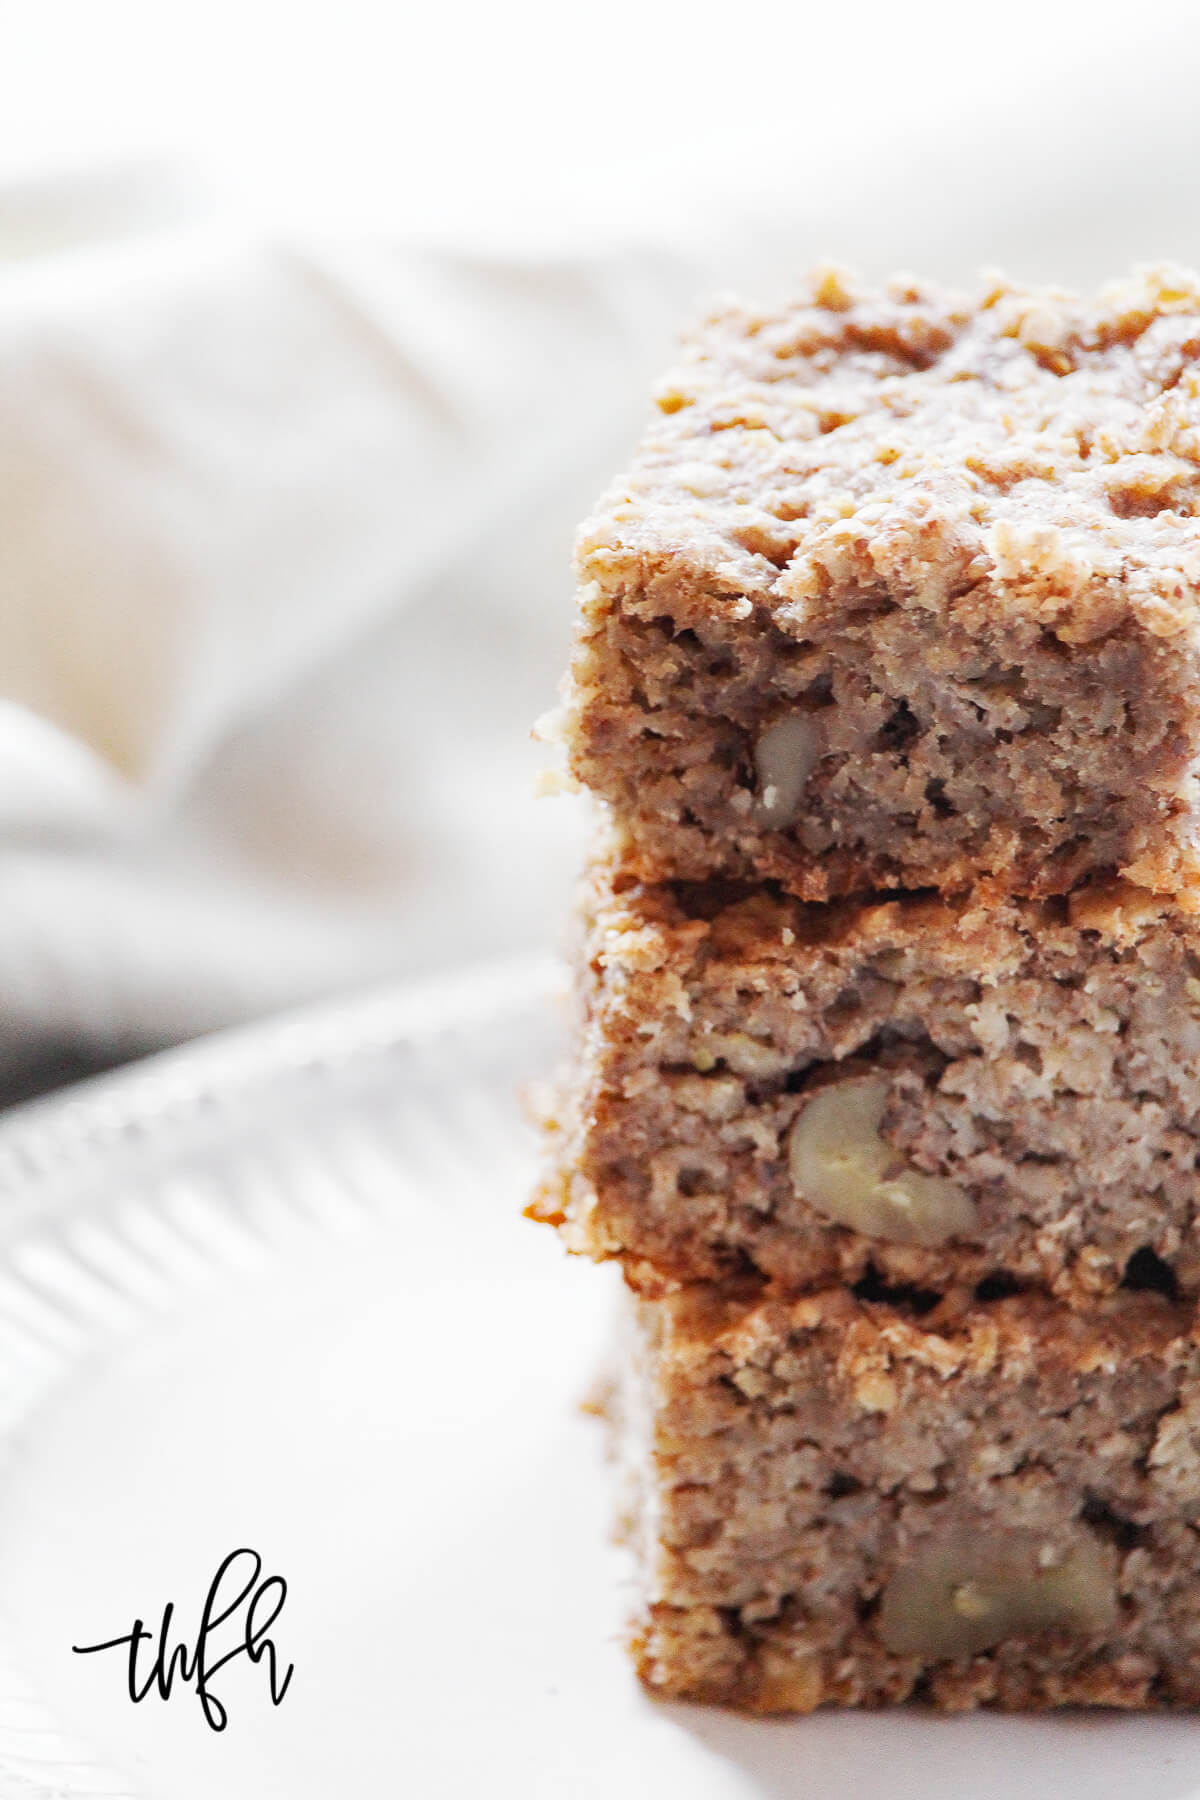 Close-up vertical image of a stack of three baked oatmeal breakfast bars on a white plate